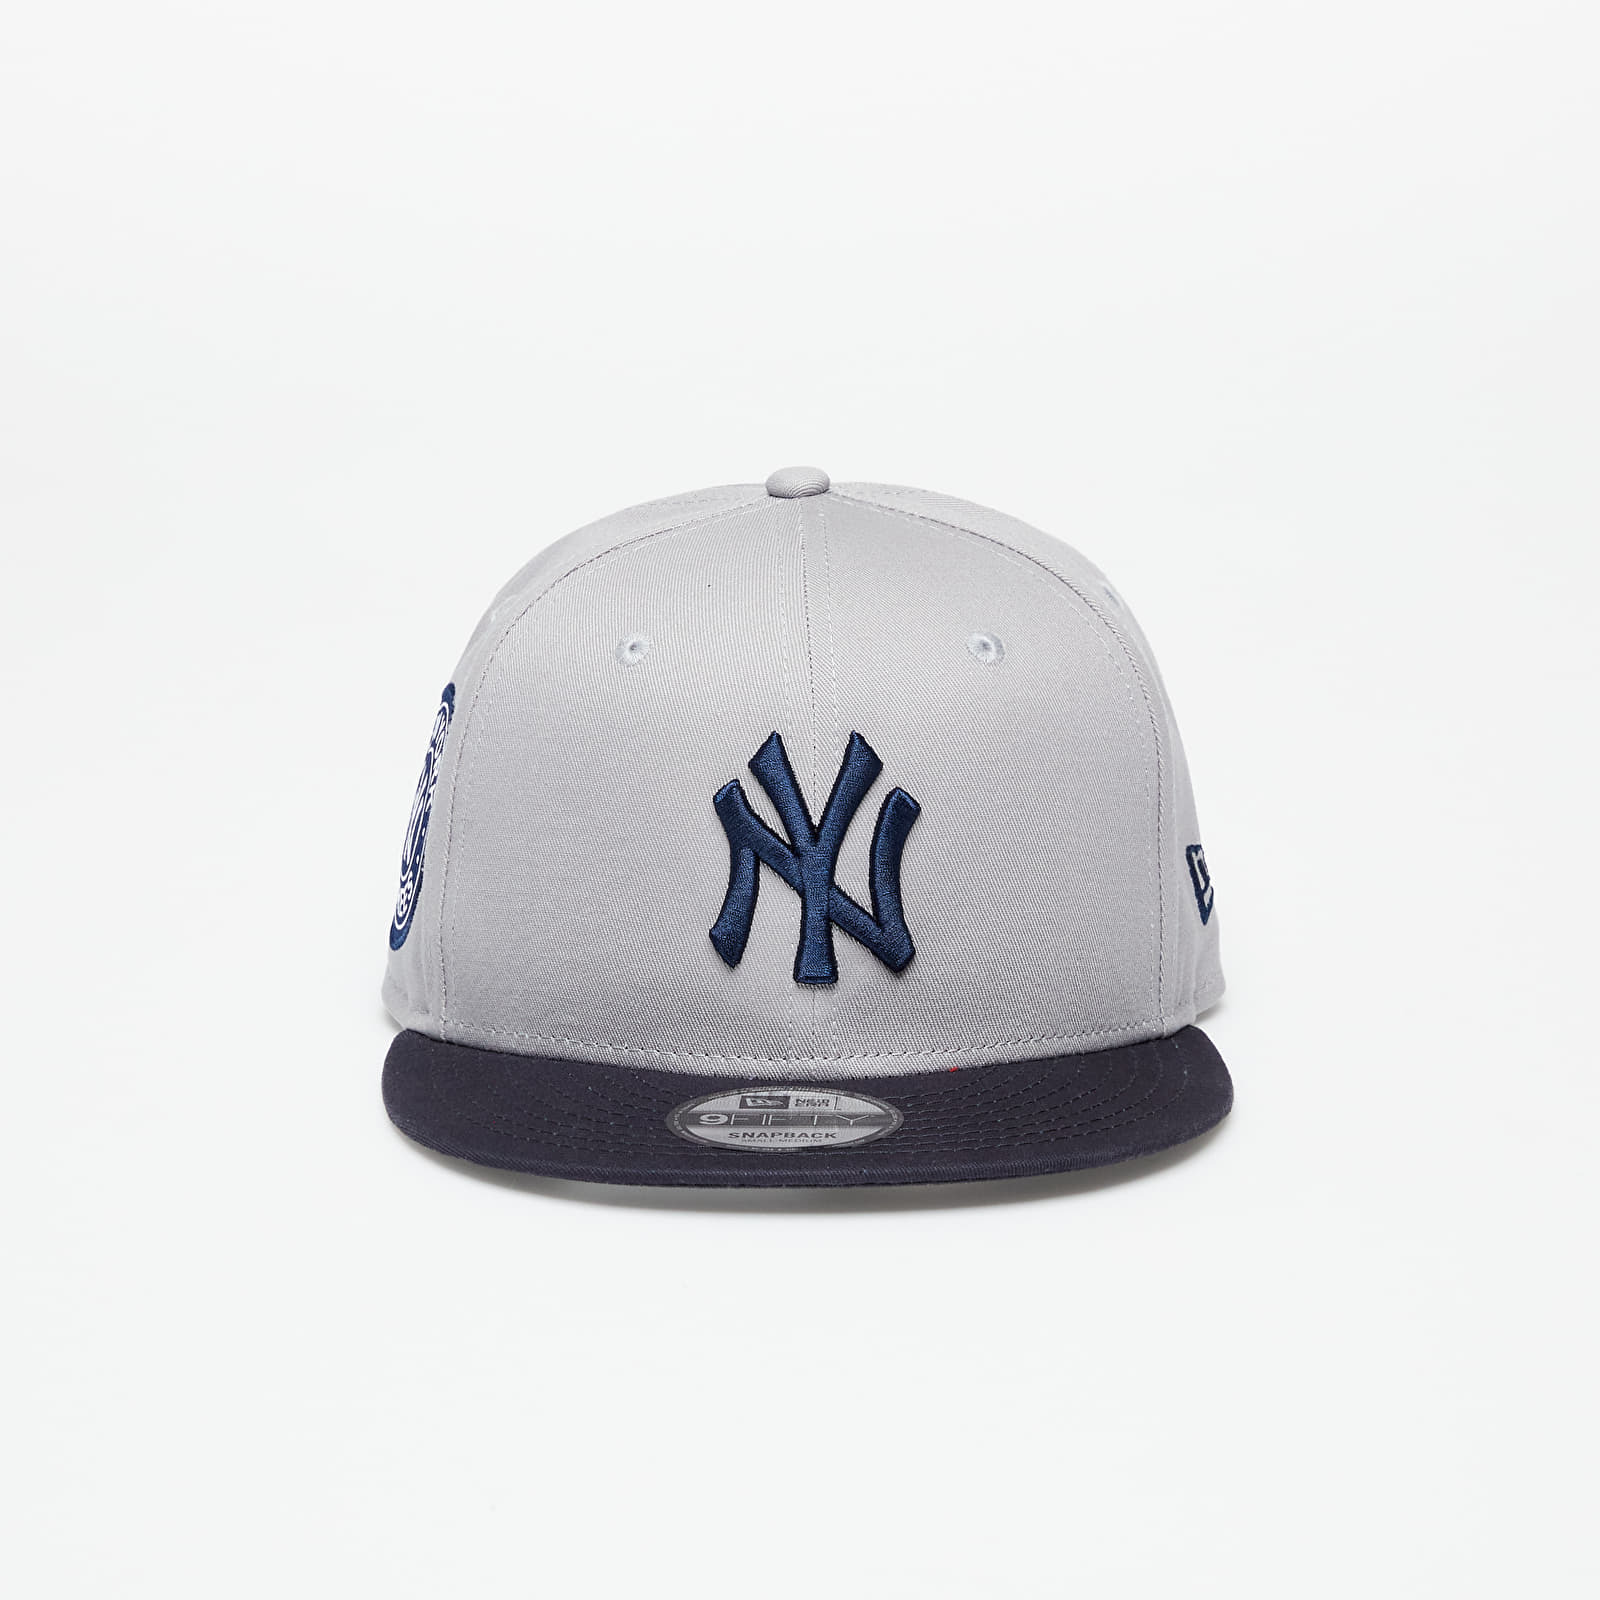 New Era - new york yankees contrast side patch 9fifty snapback cap gray/ navy